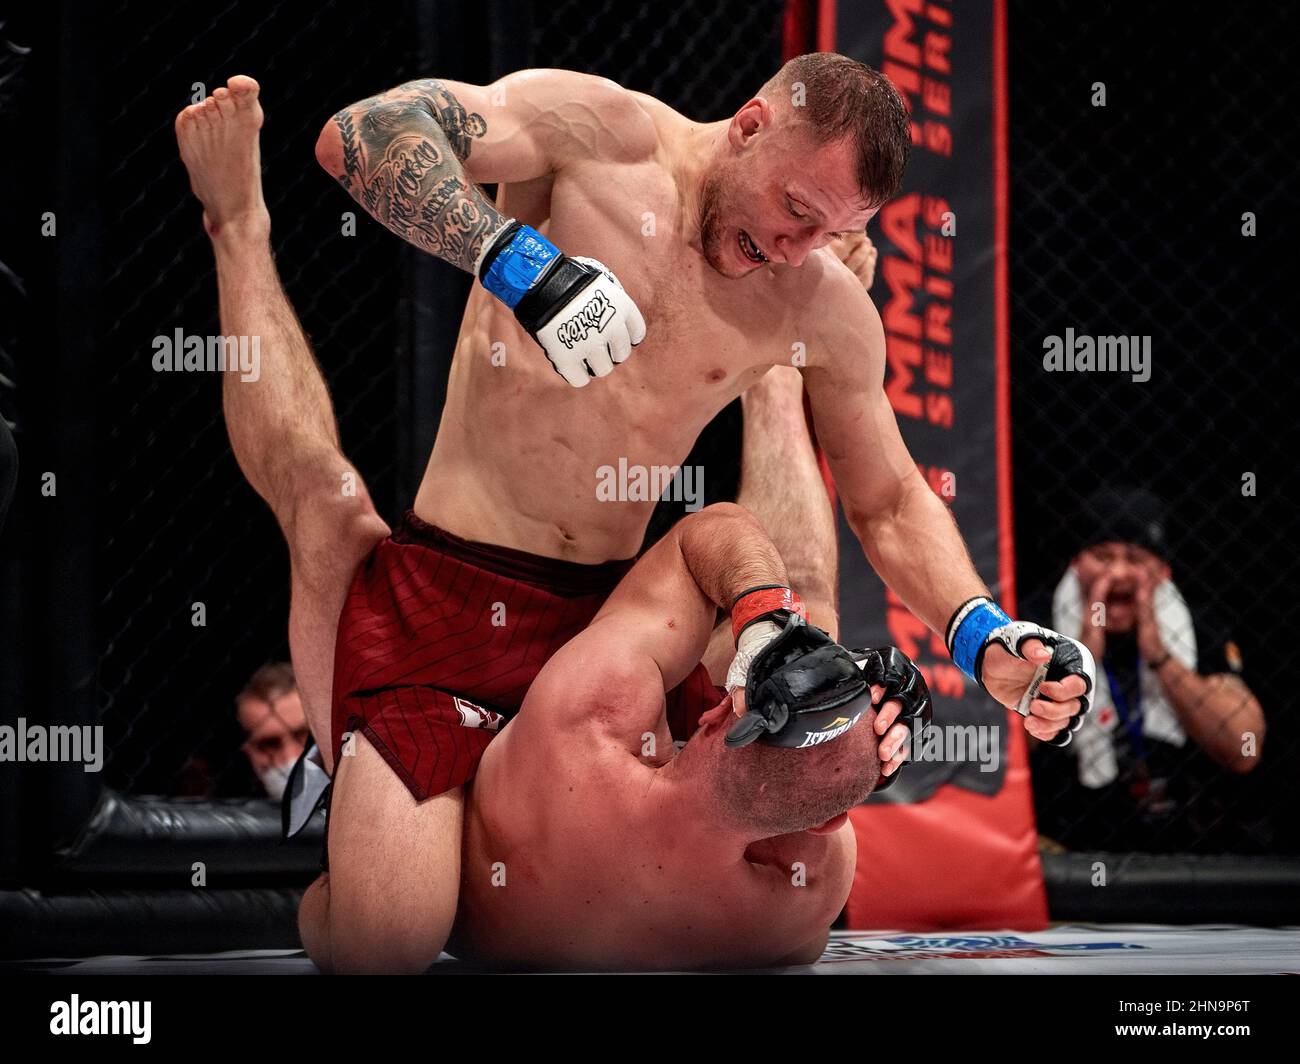 Vladislav Derevenskikh and Biyarslan Zakaryaev in action during the Fight  Riot 48 mixed martial arts tournament at the Voronezh Event Hall.On  February 12, Voronezh hosted the MMA Serie-48: Fight Riot tournament.  Russia,